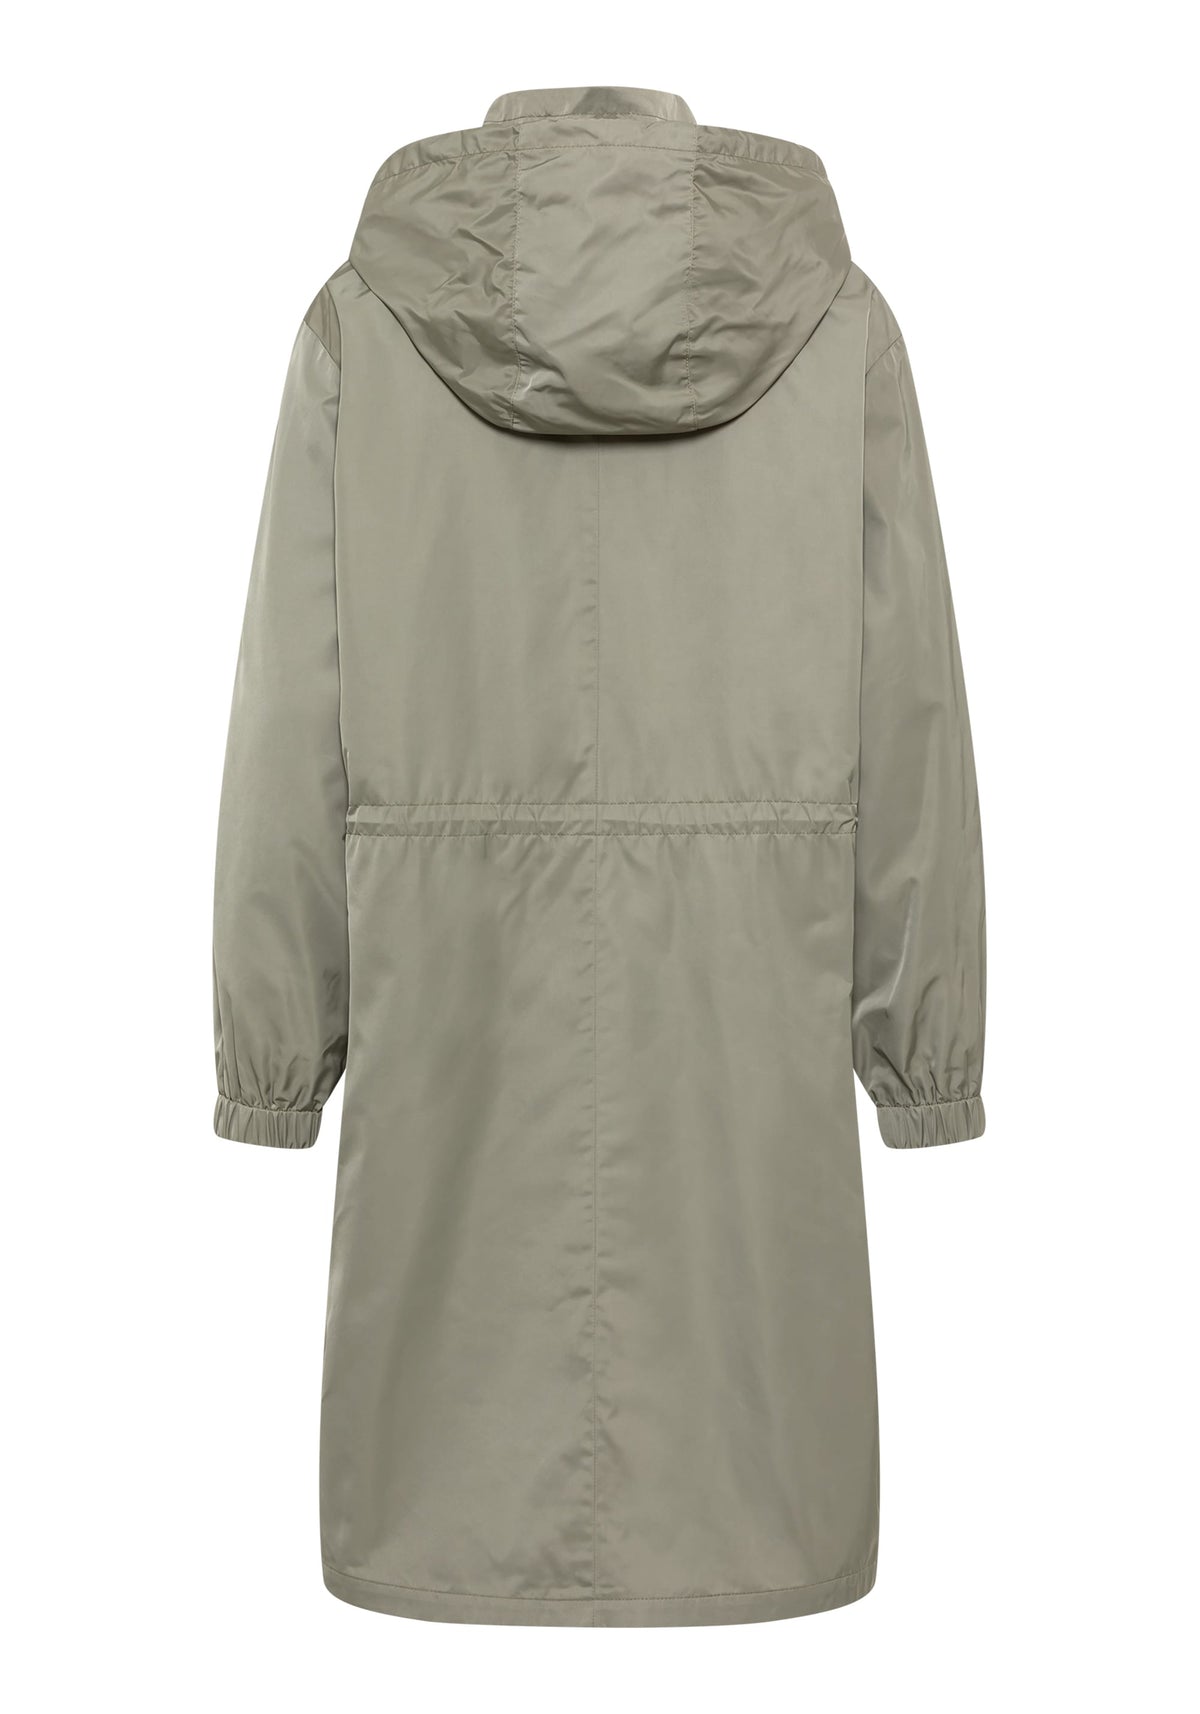 Anorak Jacket with Removable Hood